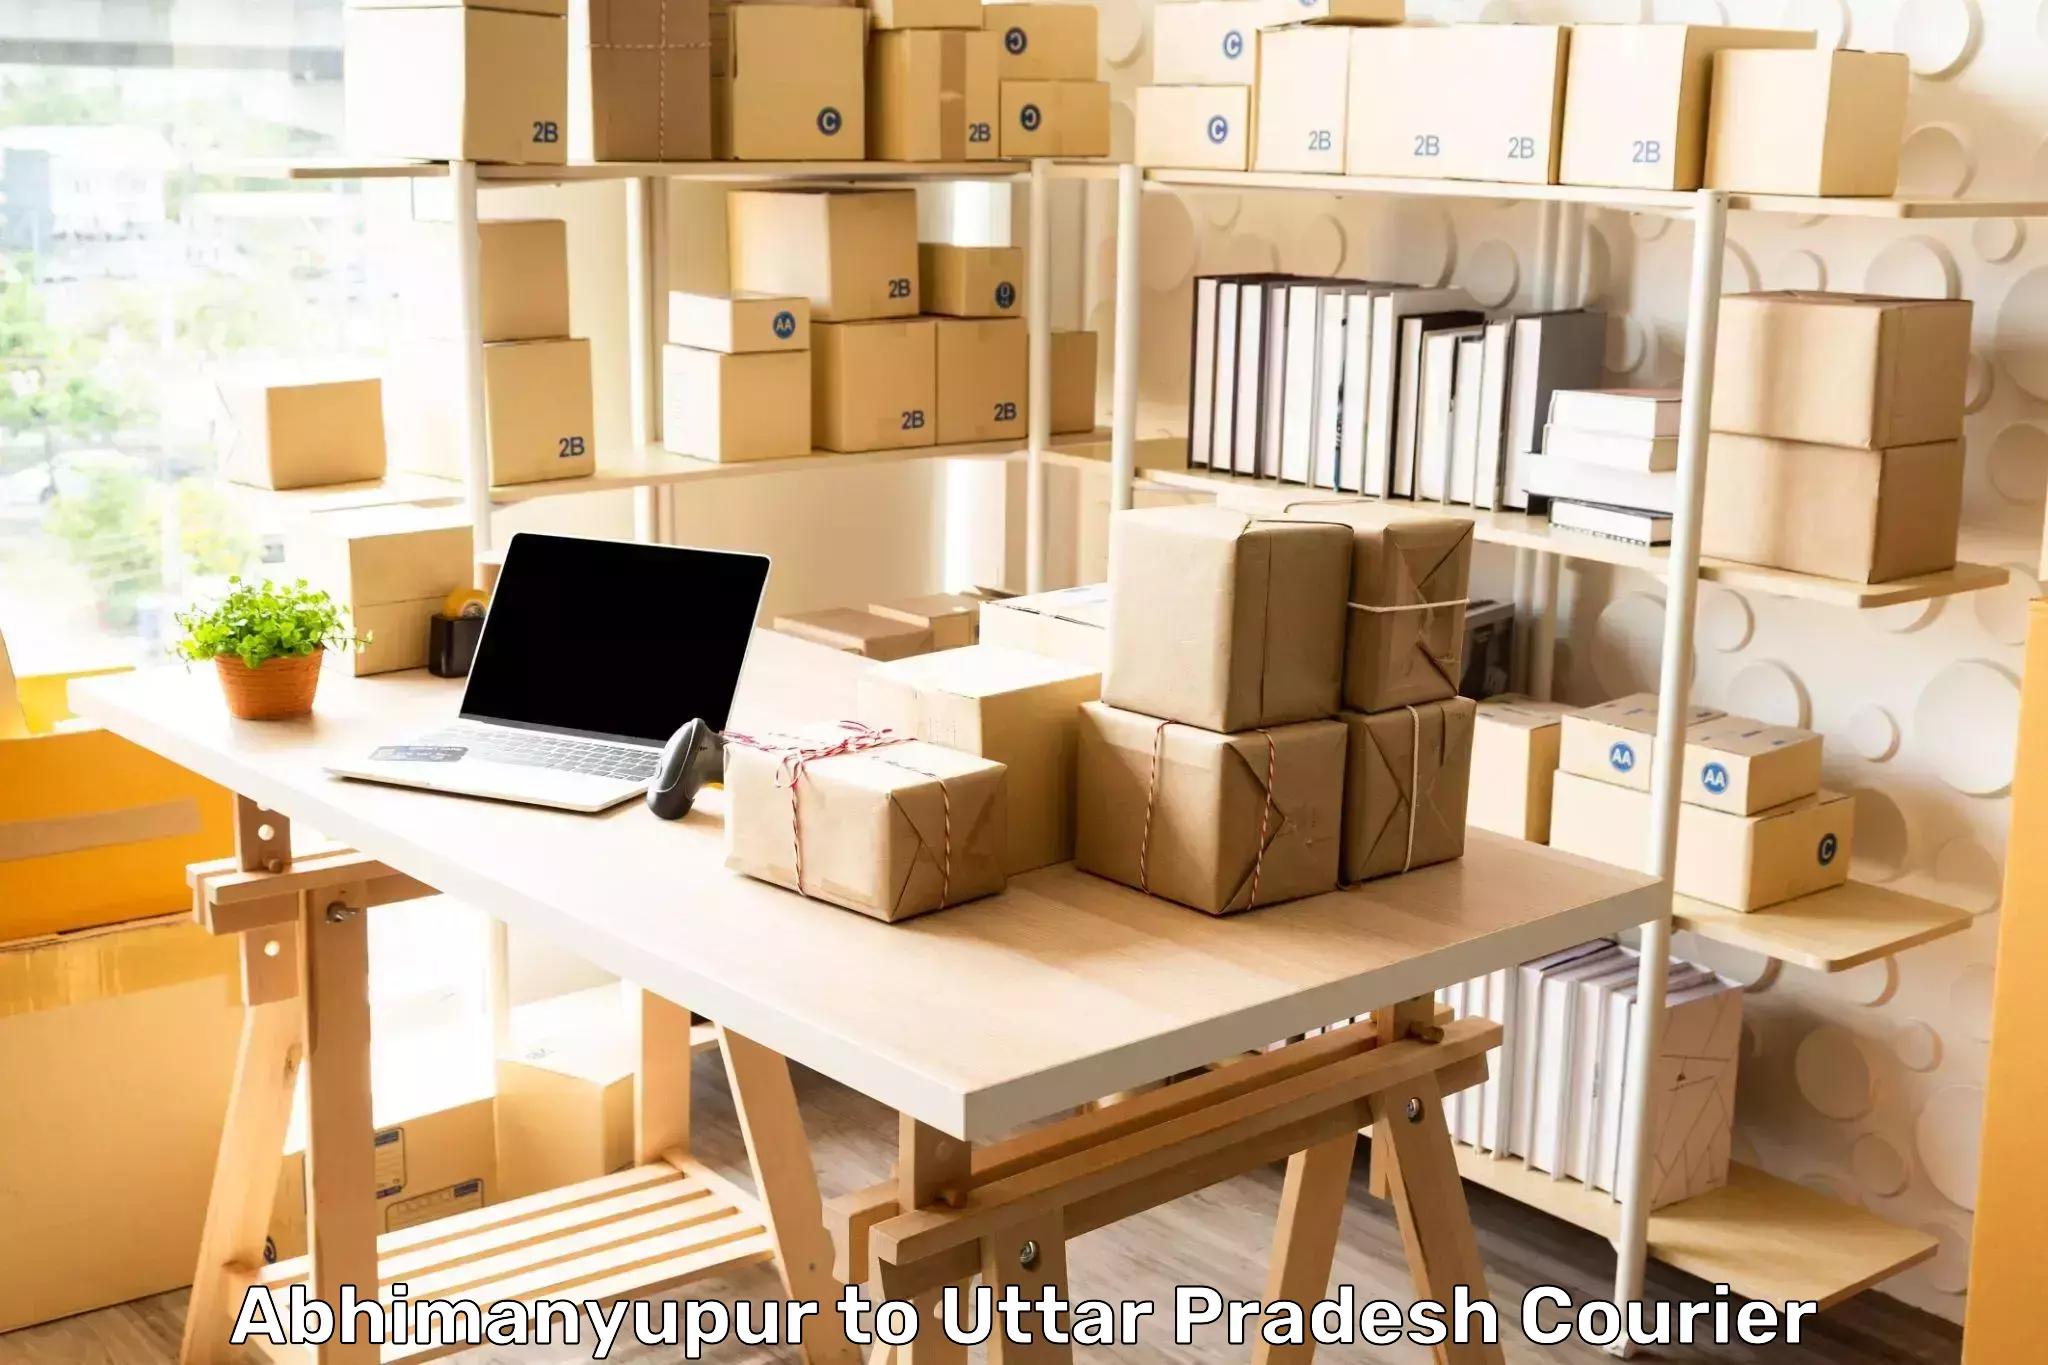 Affordable shipping solutions Abhimanyupur to Unnao